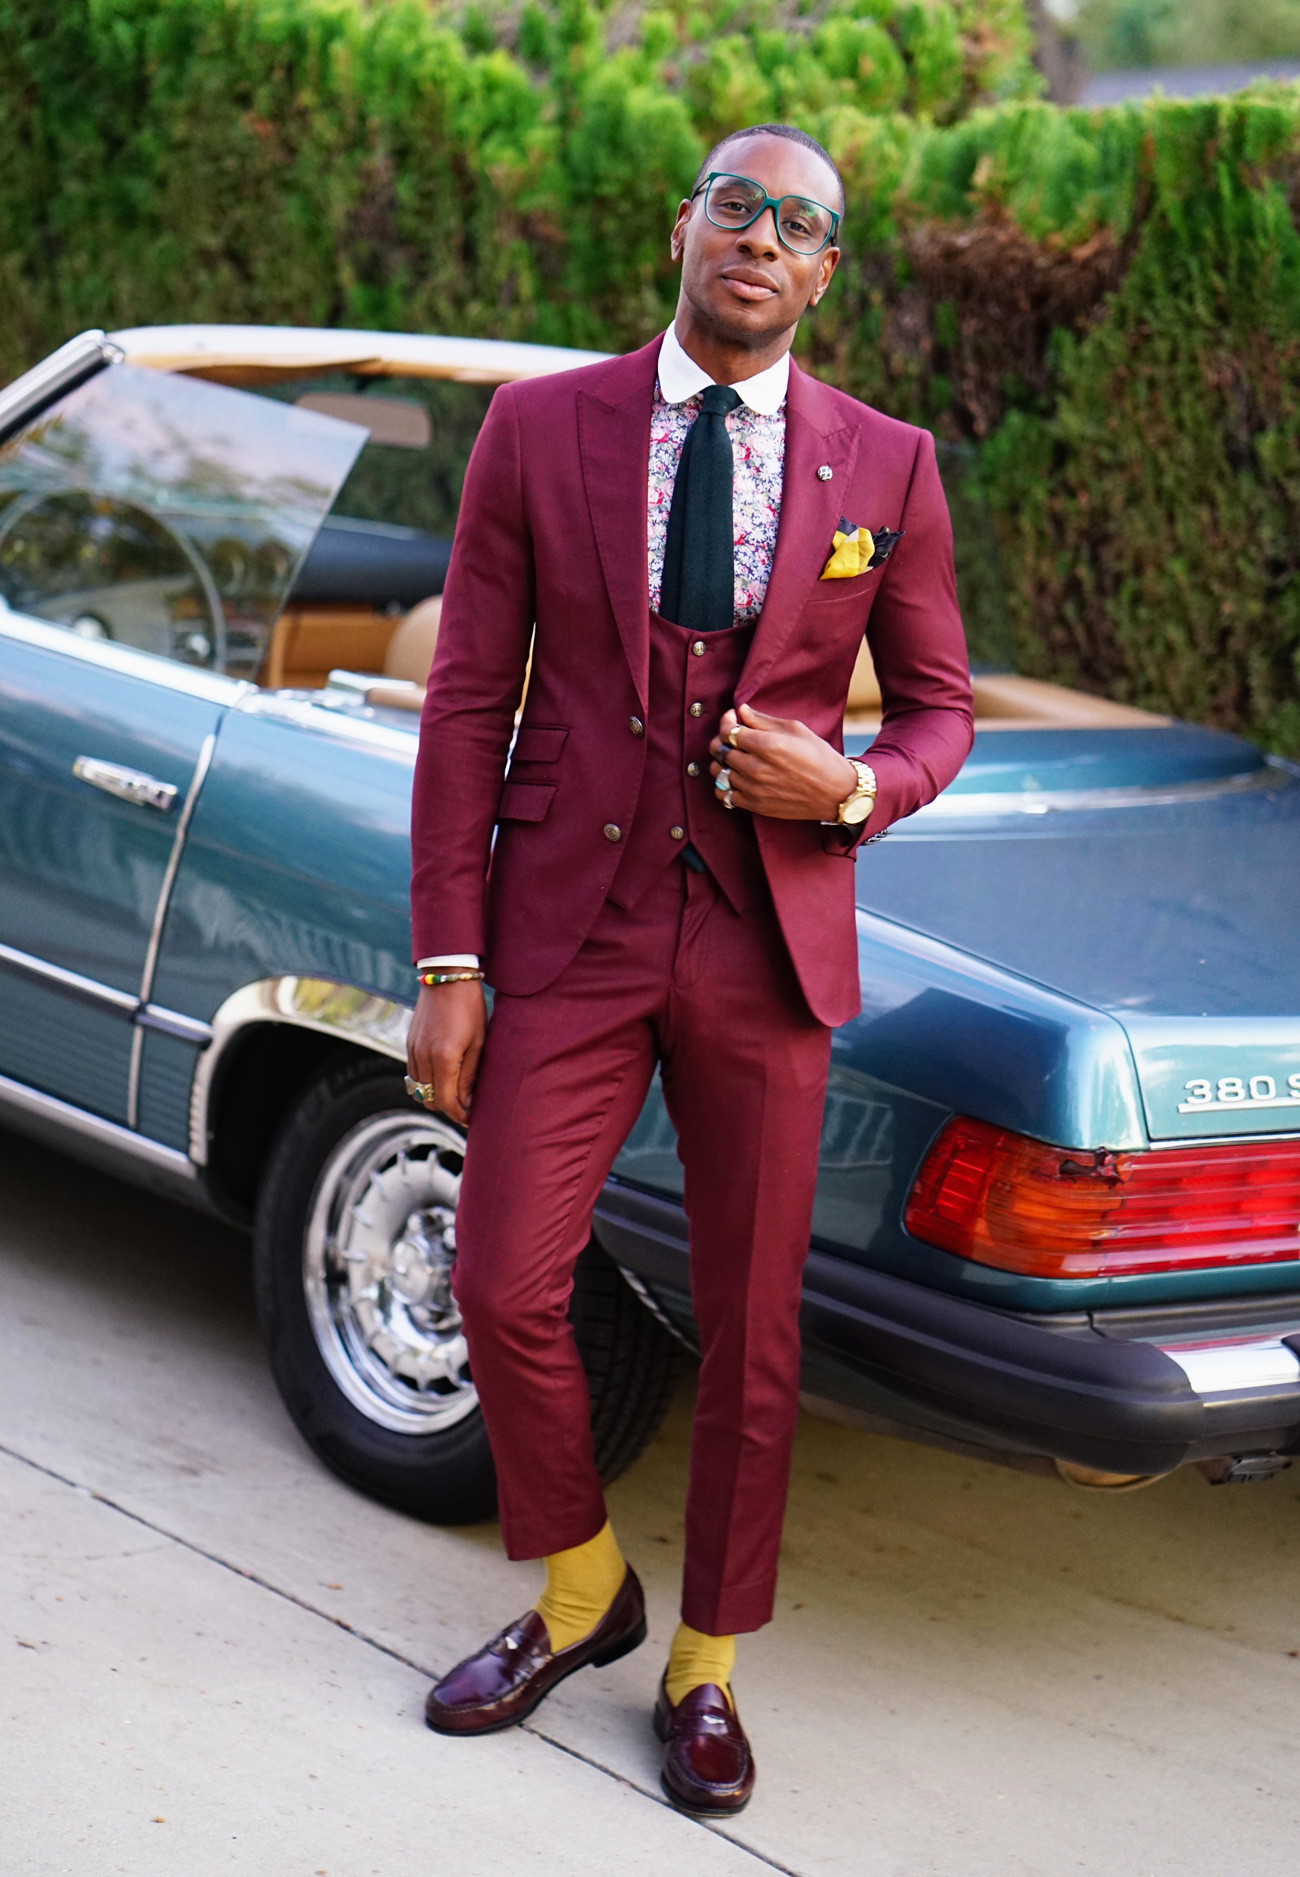 OOTD: 3 PIECE BURGUNDY SUIT TAILORED TO PERFECTION – Norris Danta Ford